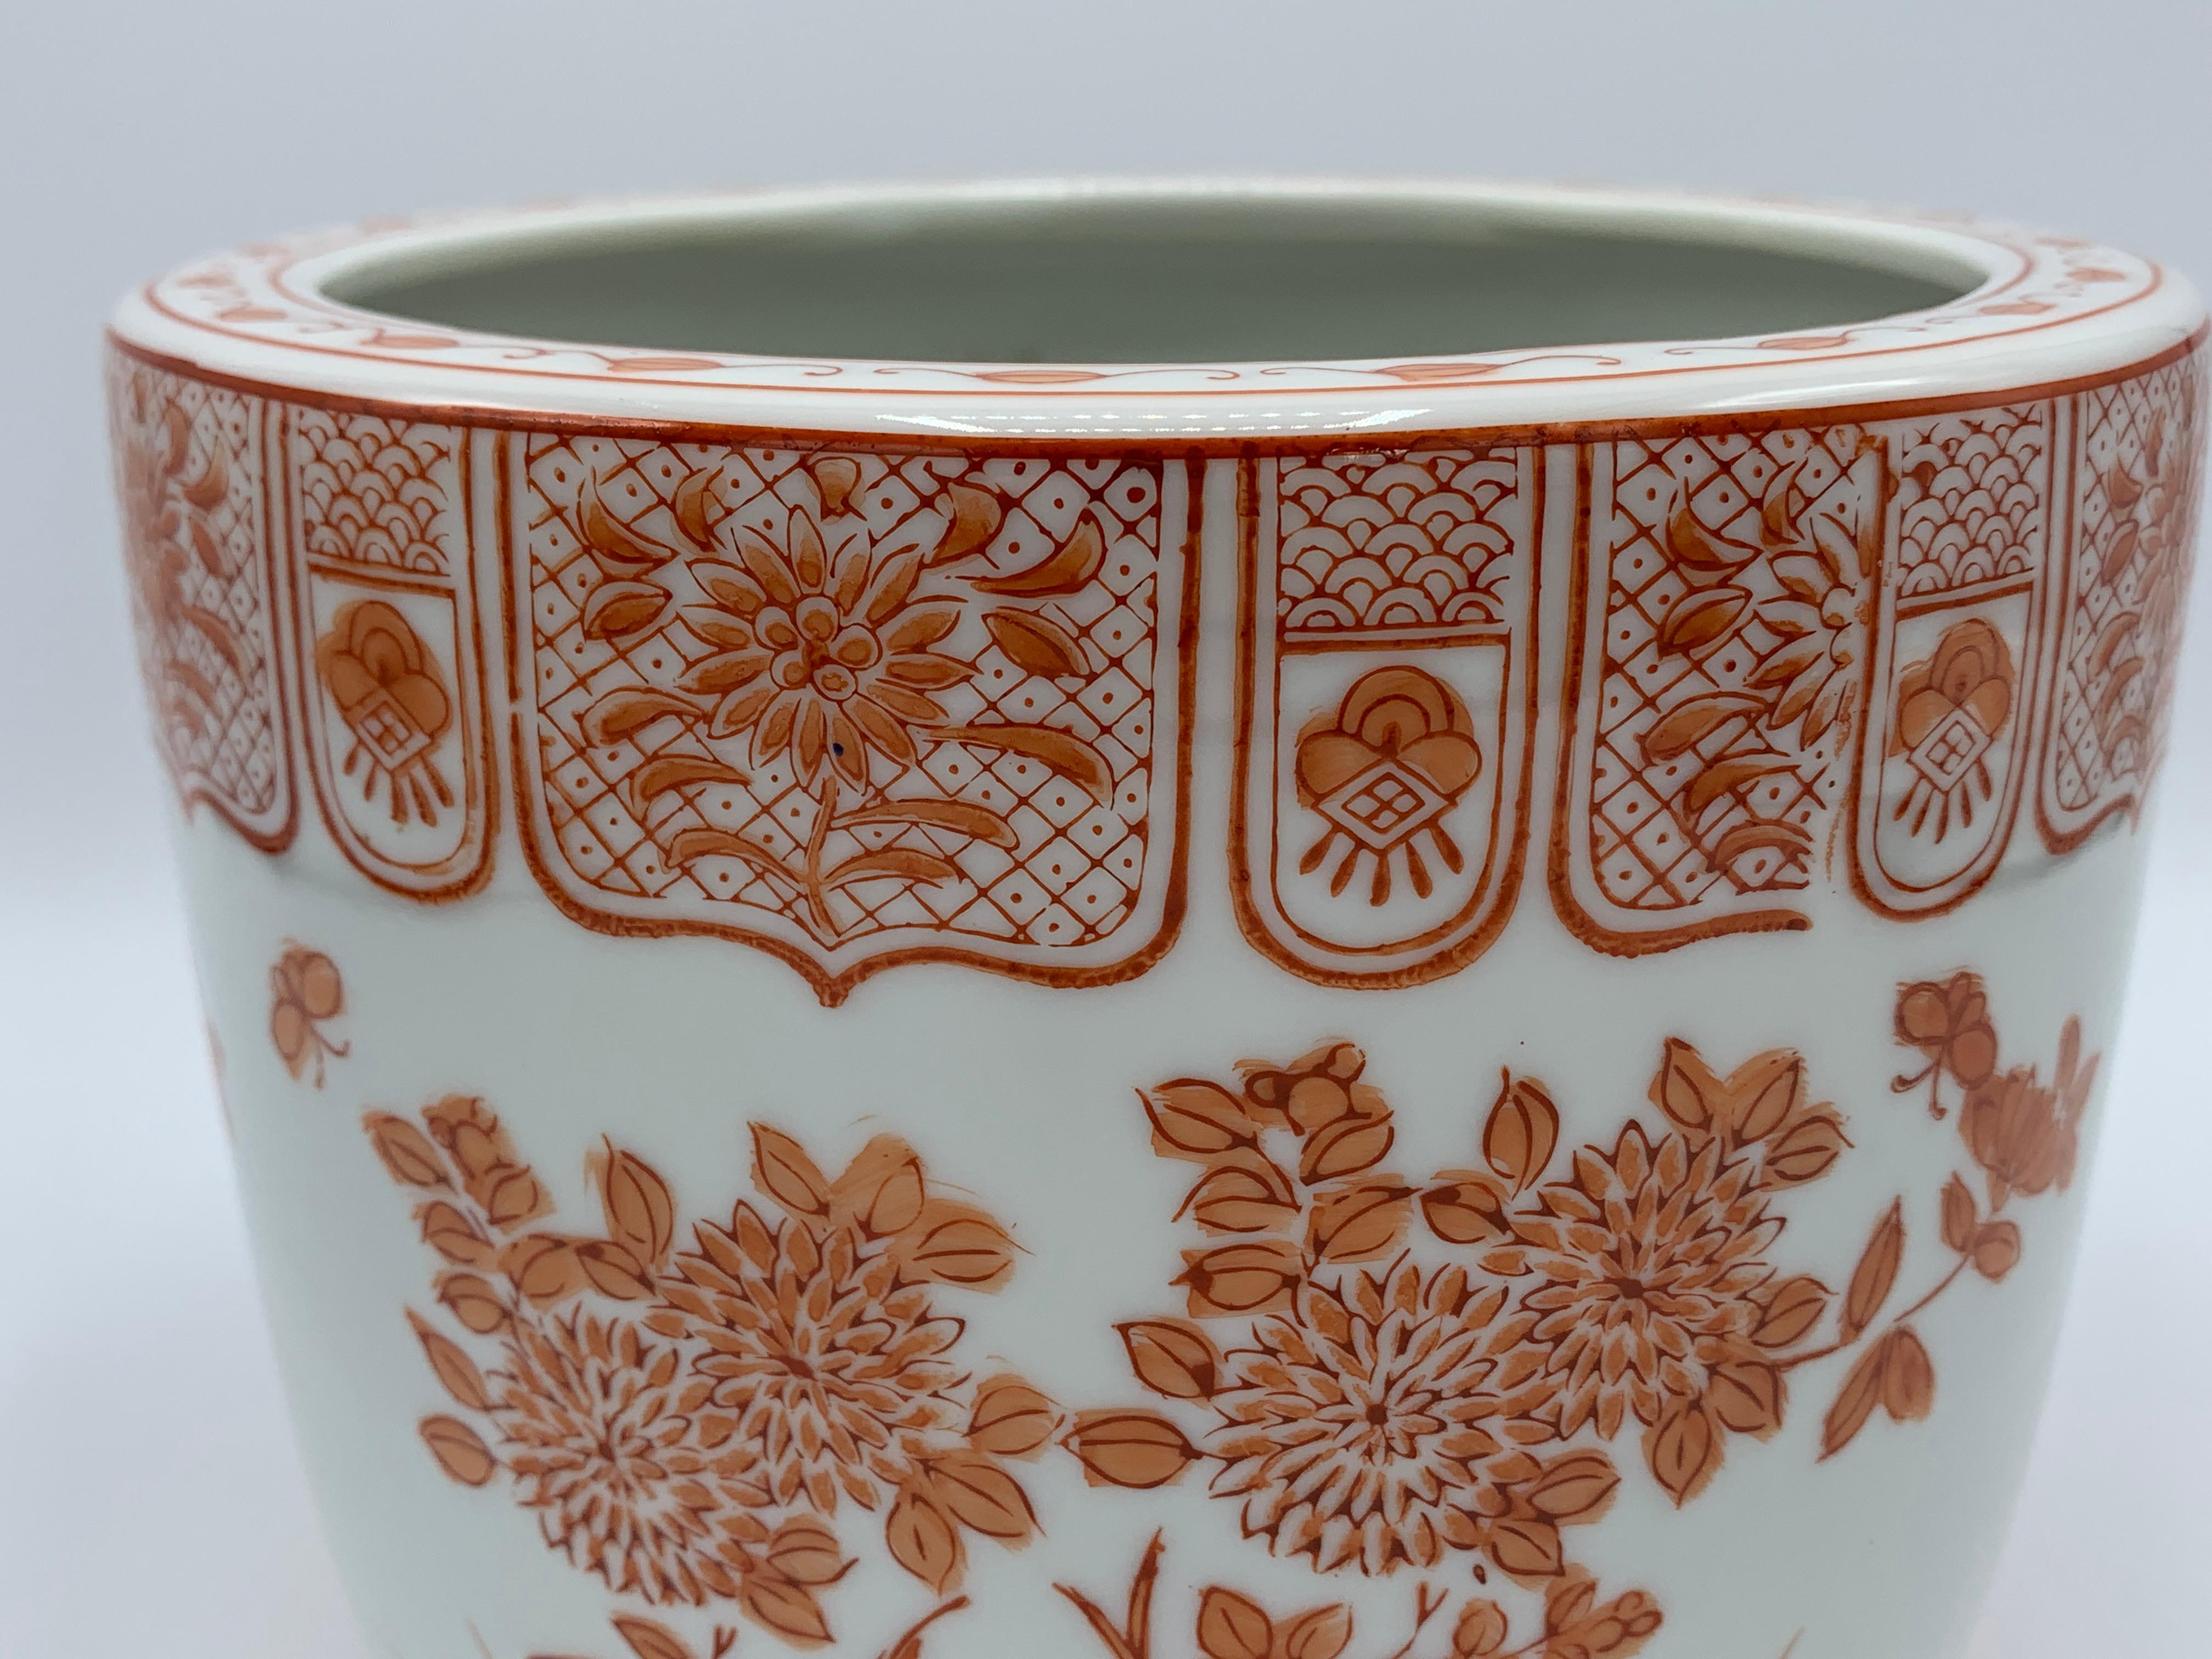 20th Century 1970s Orange and White Floral Painted Cachepot